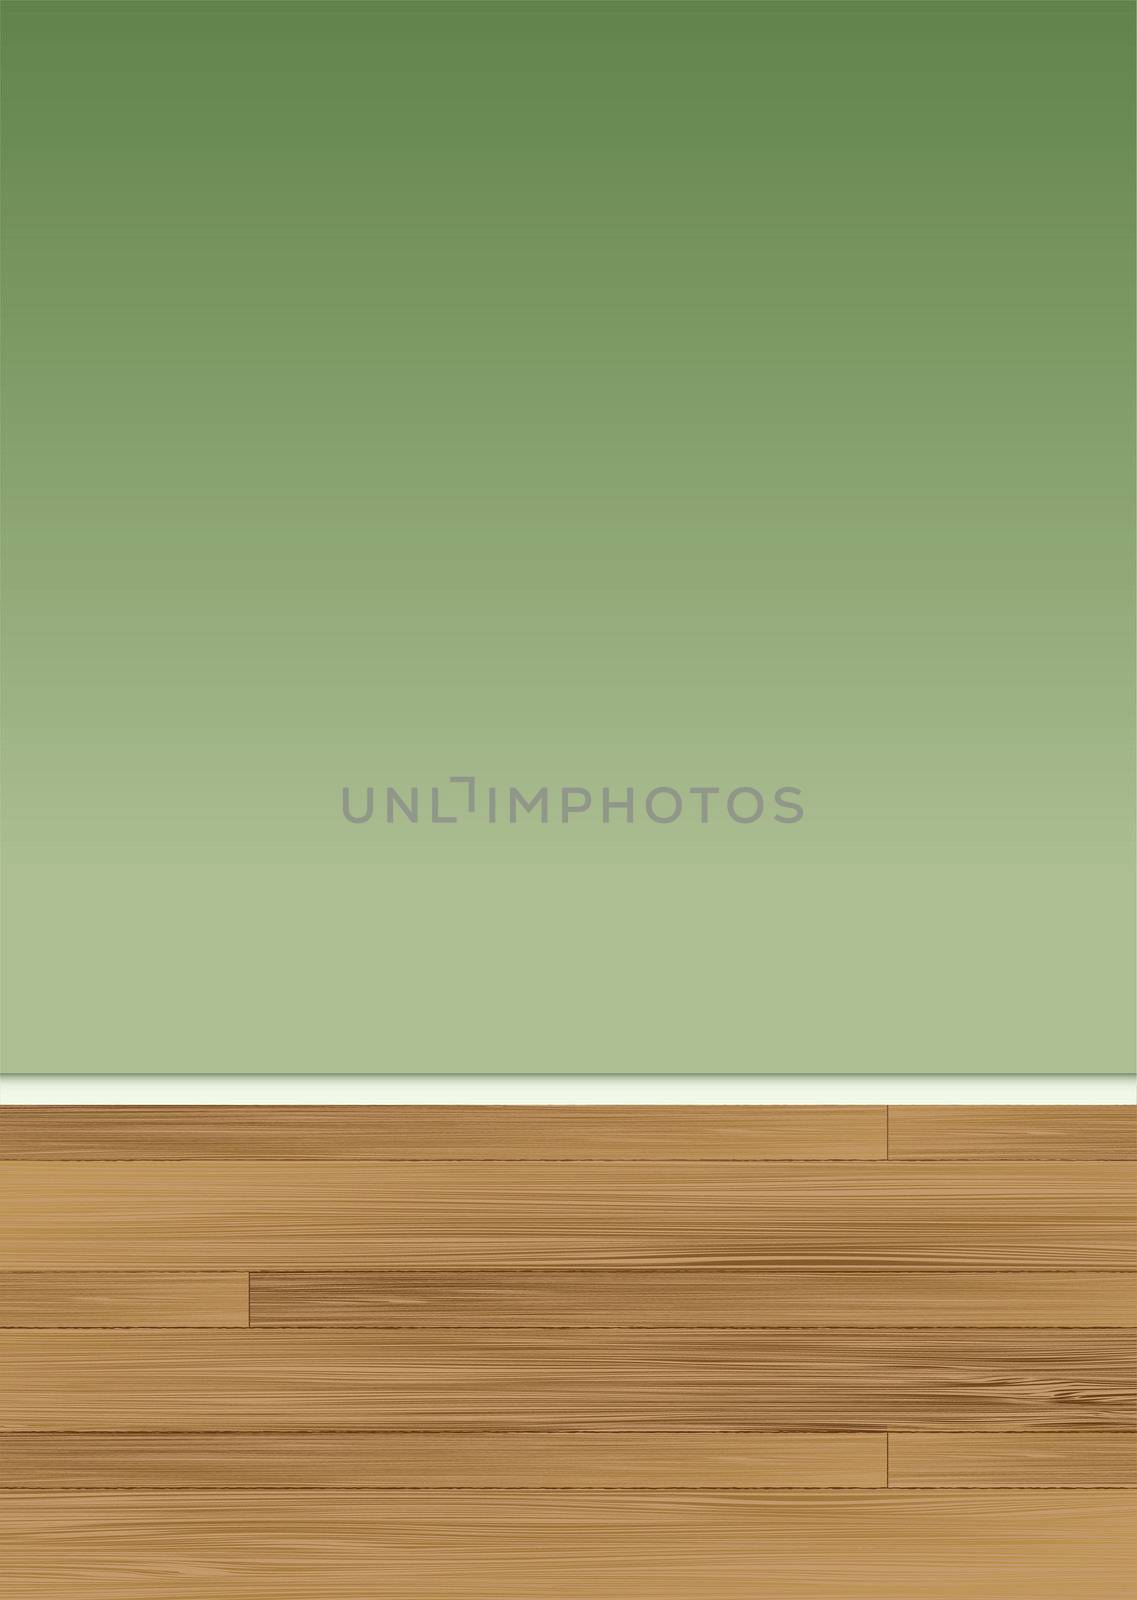 View of a wooden floor with a blank green wall and skirting board